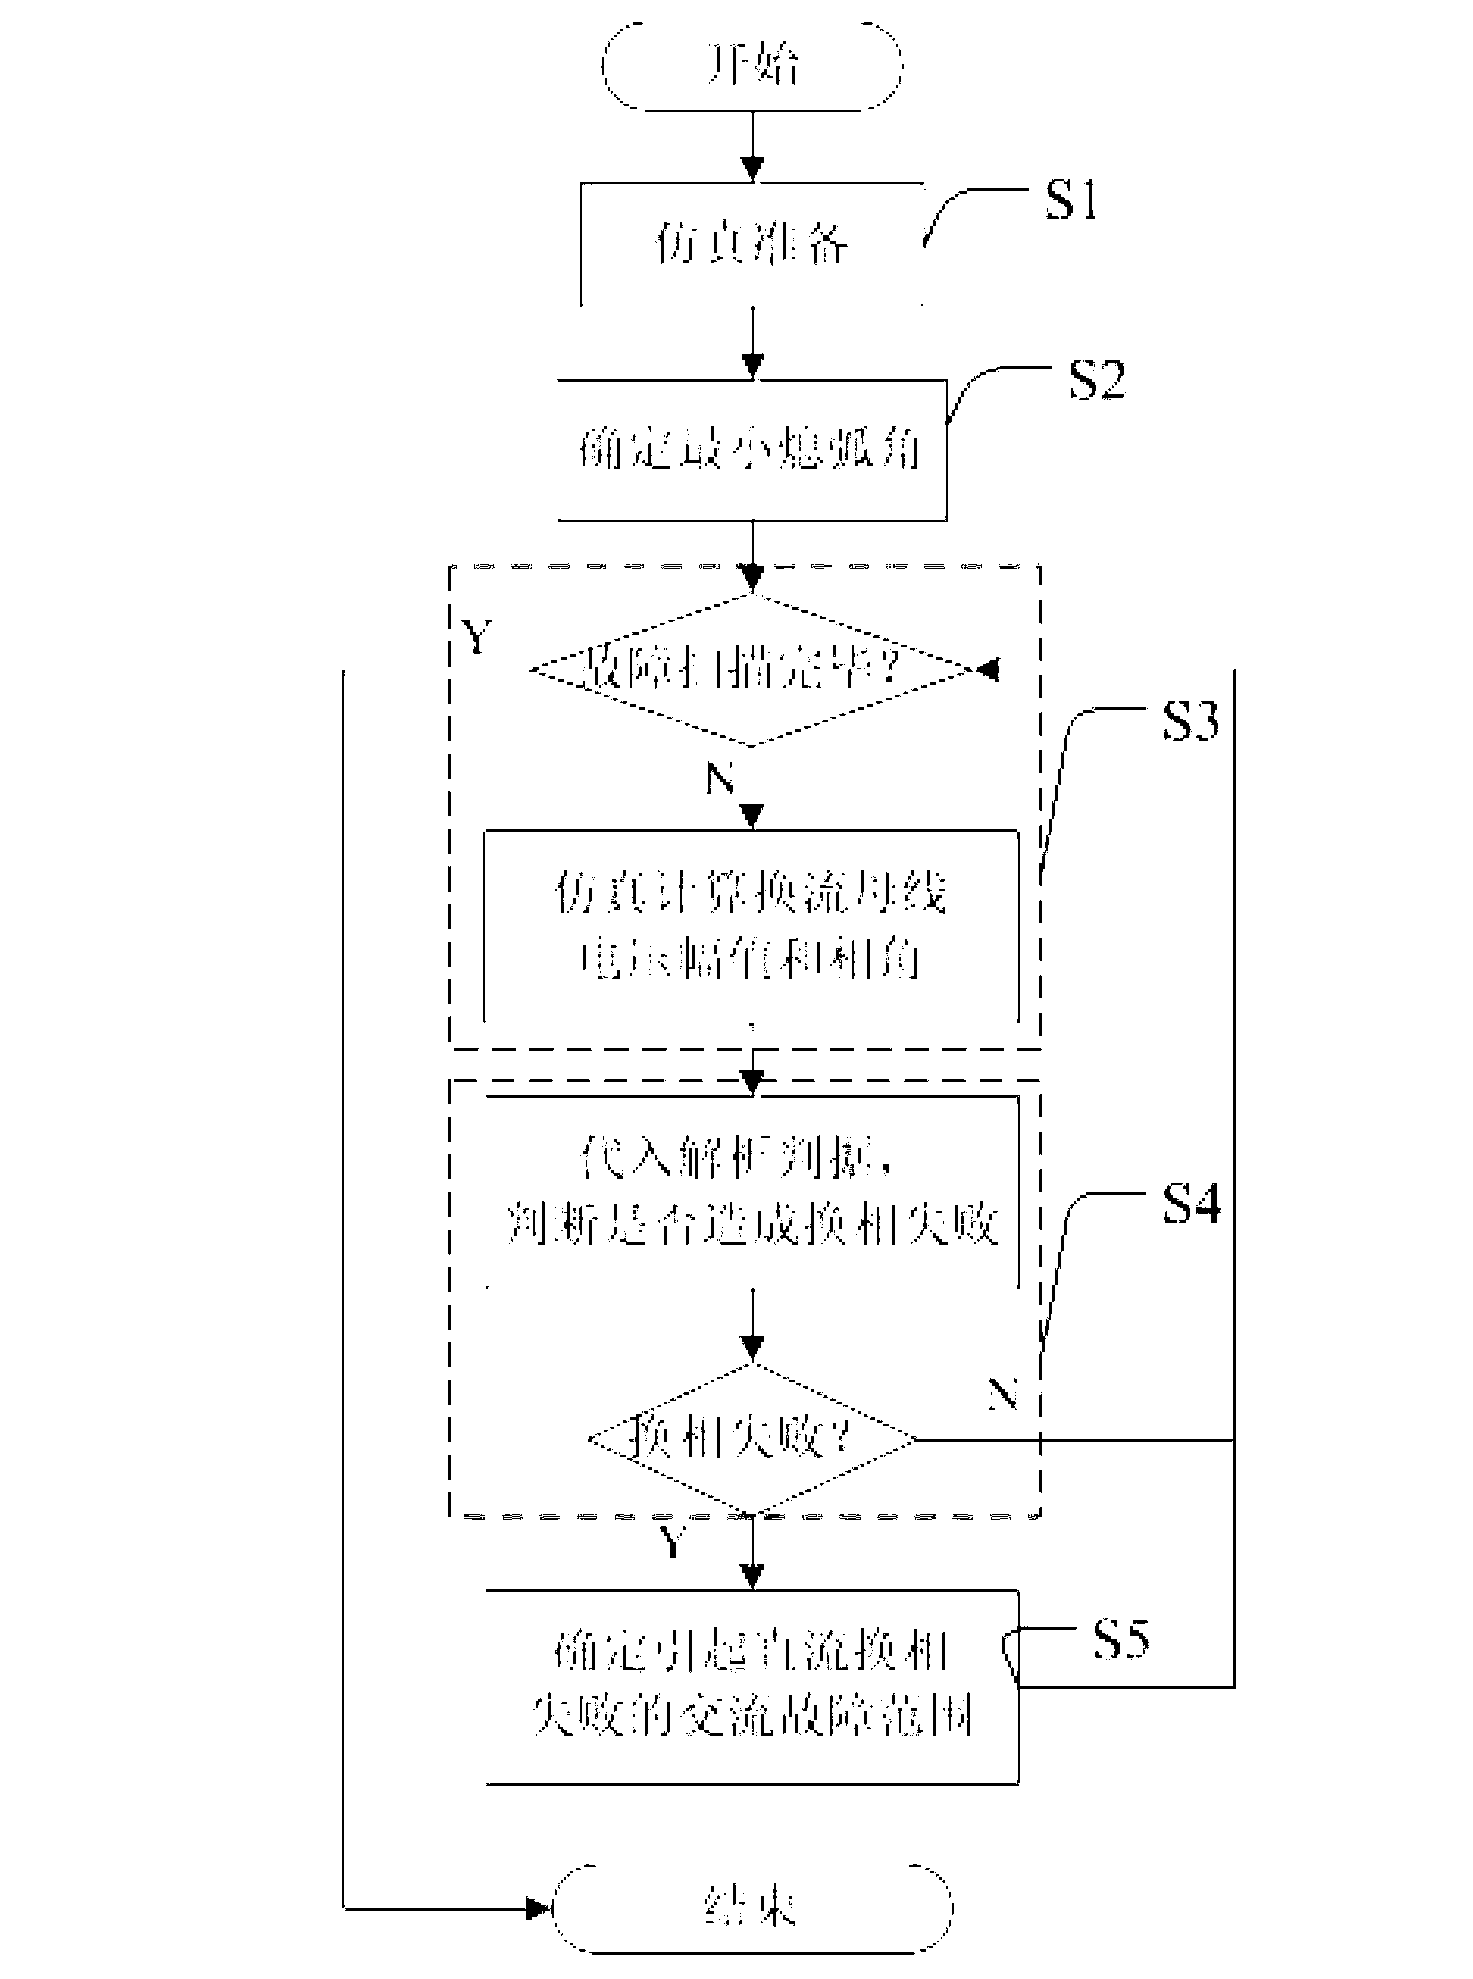 Method and system for determining alternating-current system fault range resulting in direct-current commutation failure